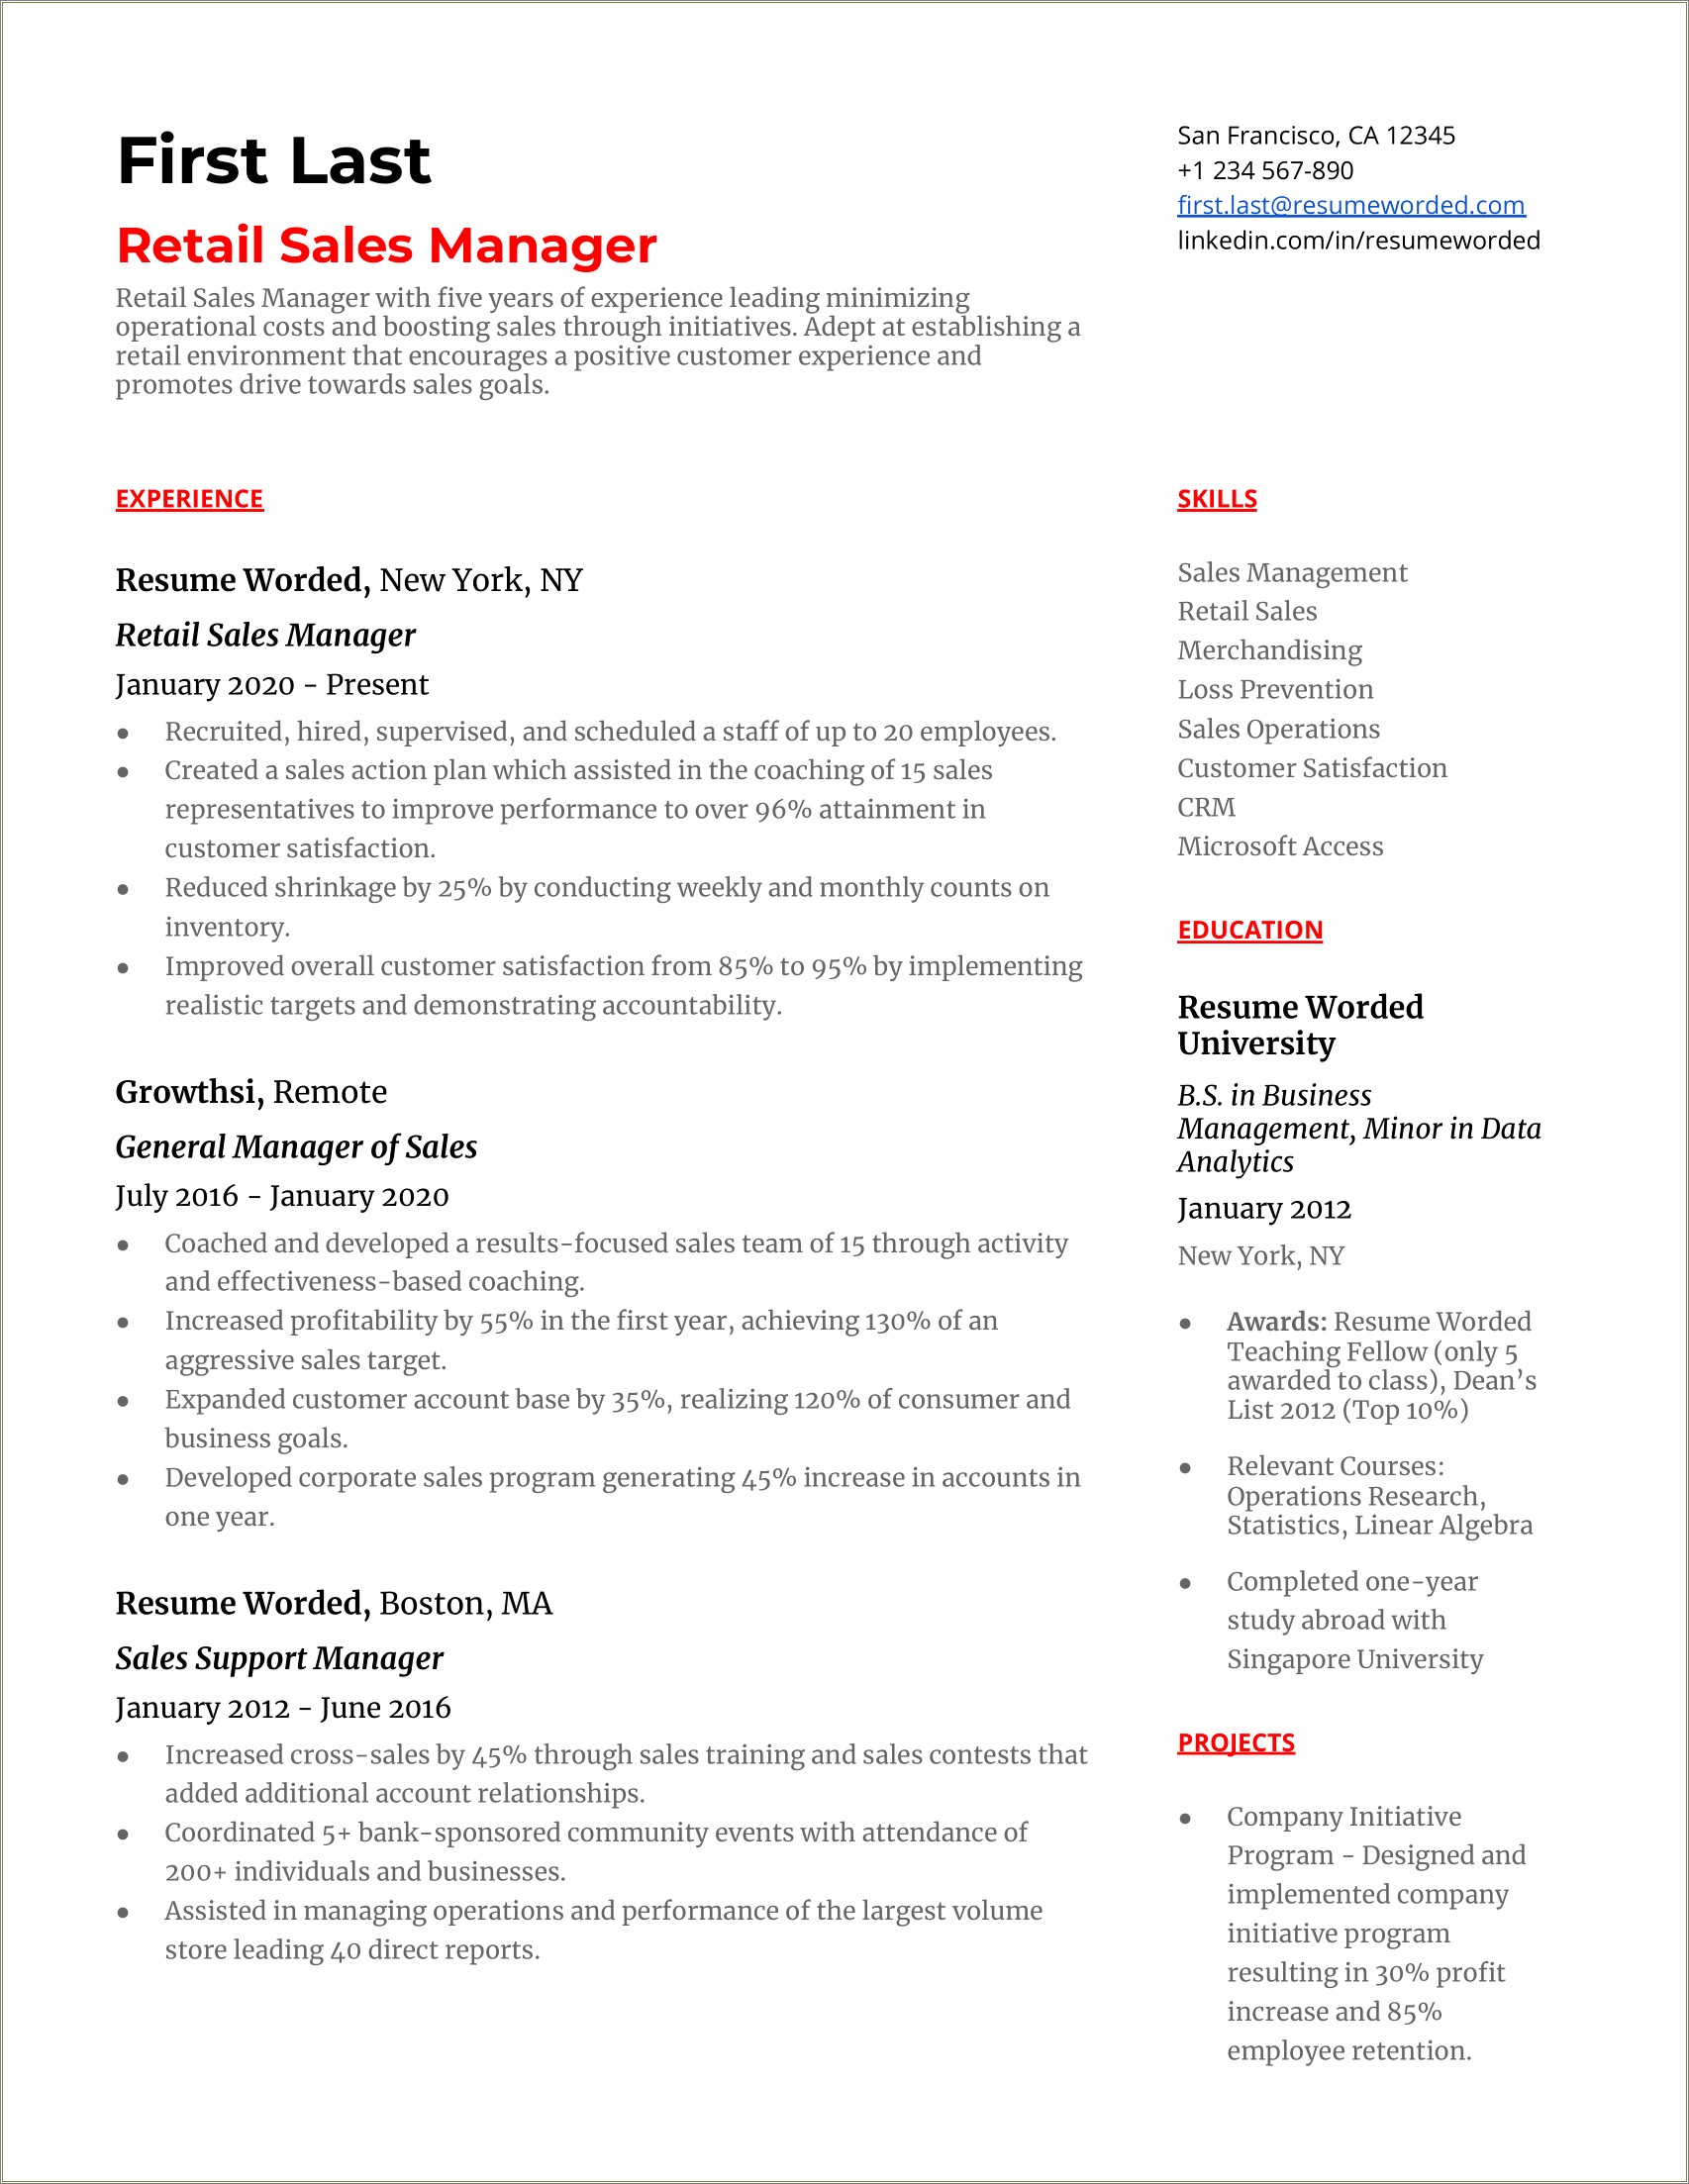 Driver Manager Moving Company Resume